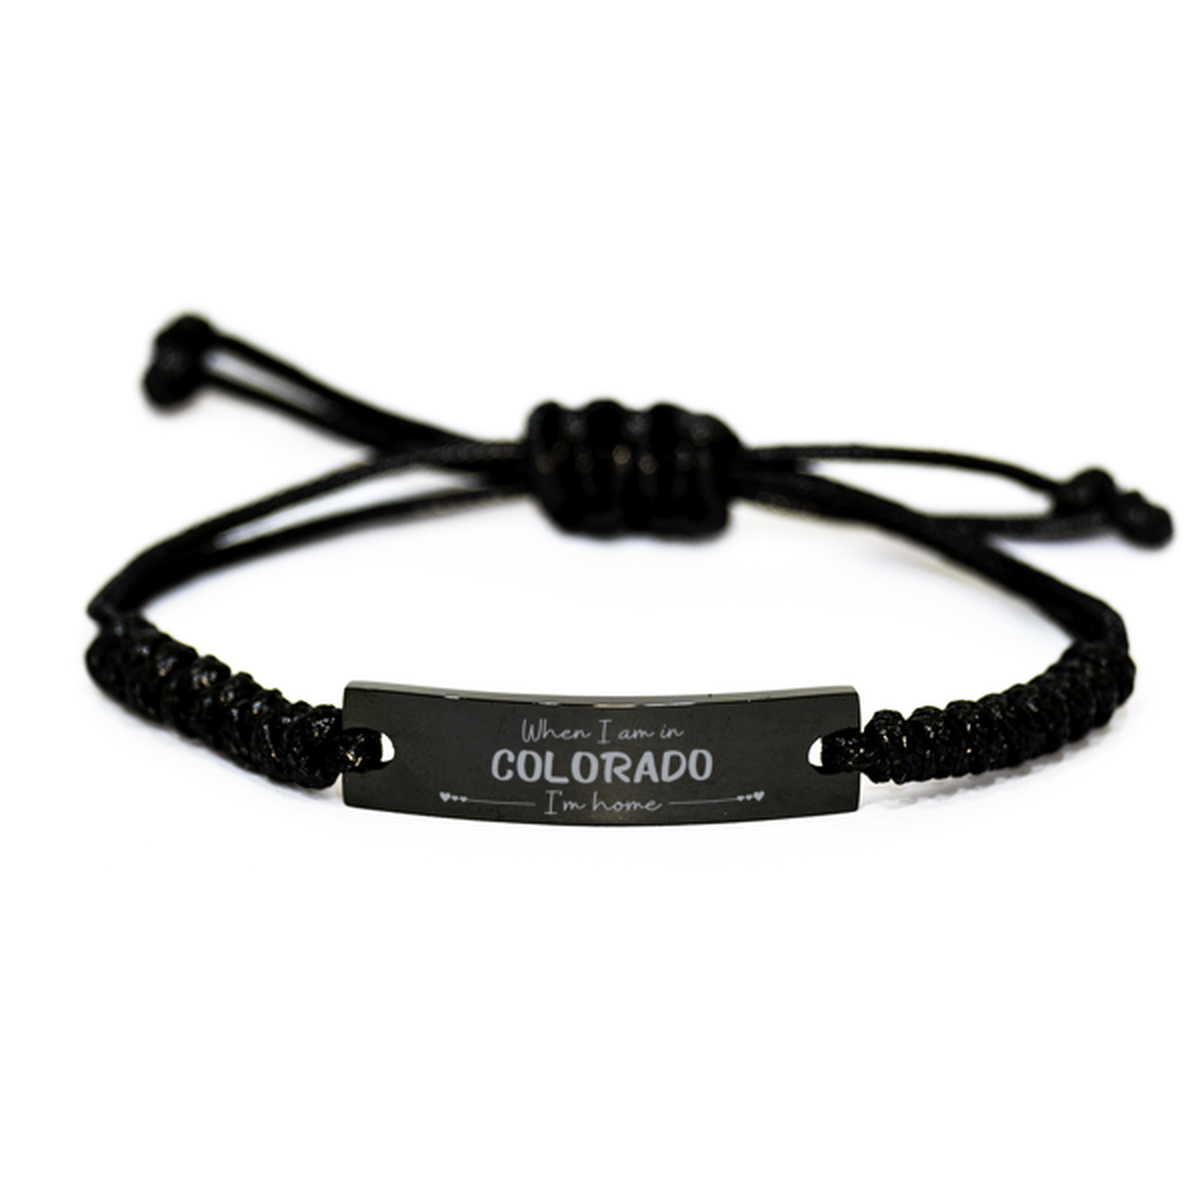 When I am in Colorado I'm home Black Rope Bracelet, Cheap Gifts For Colorado, State Colorado Birthday Gifts for Friends Coworker